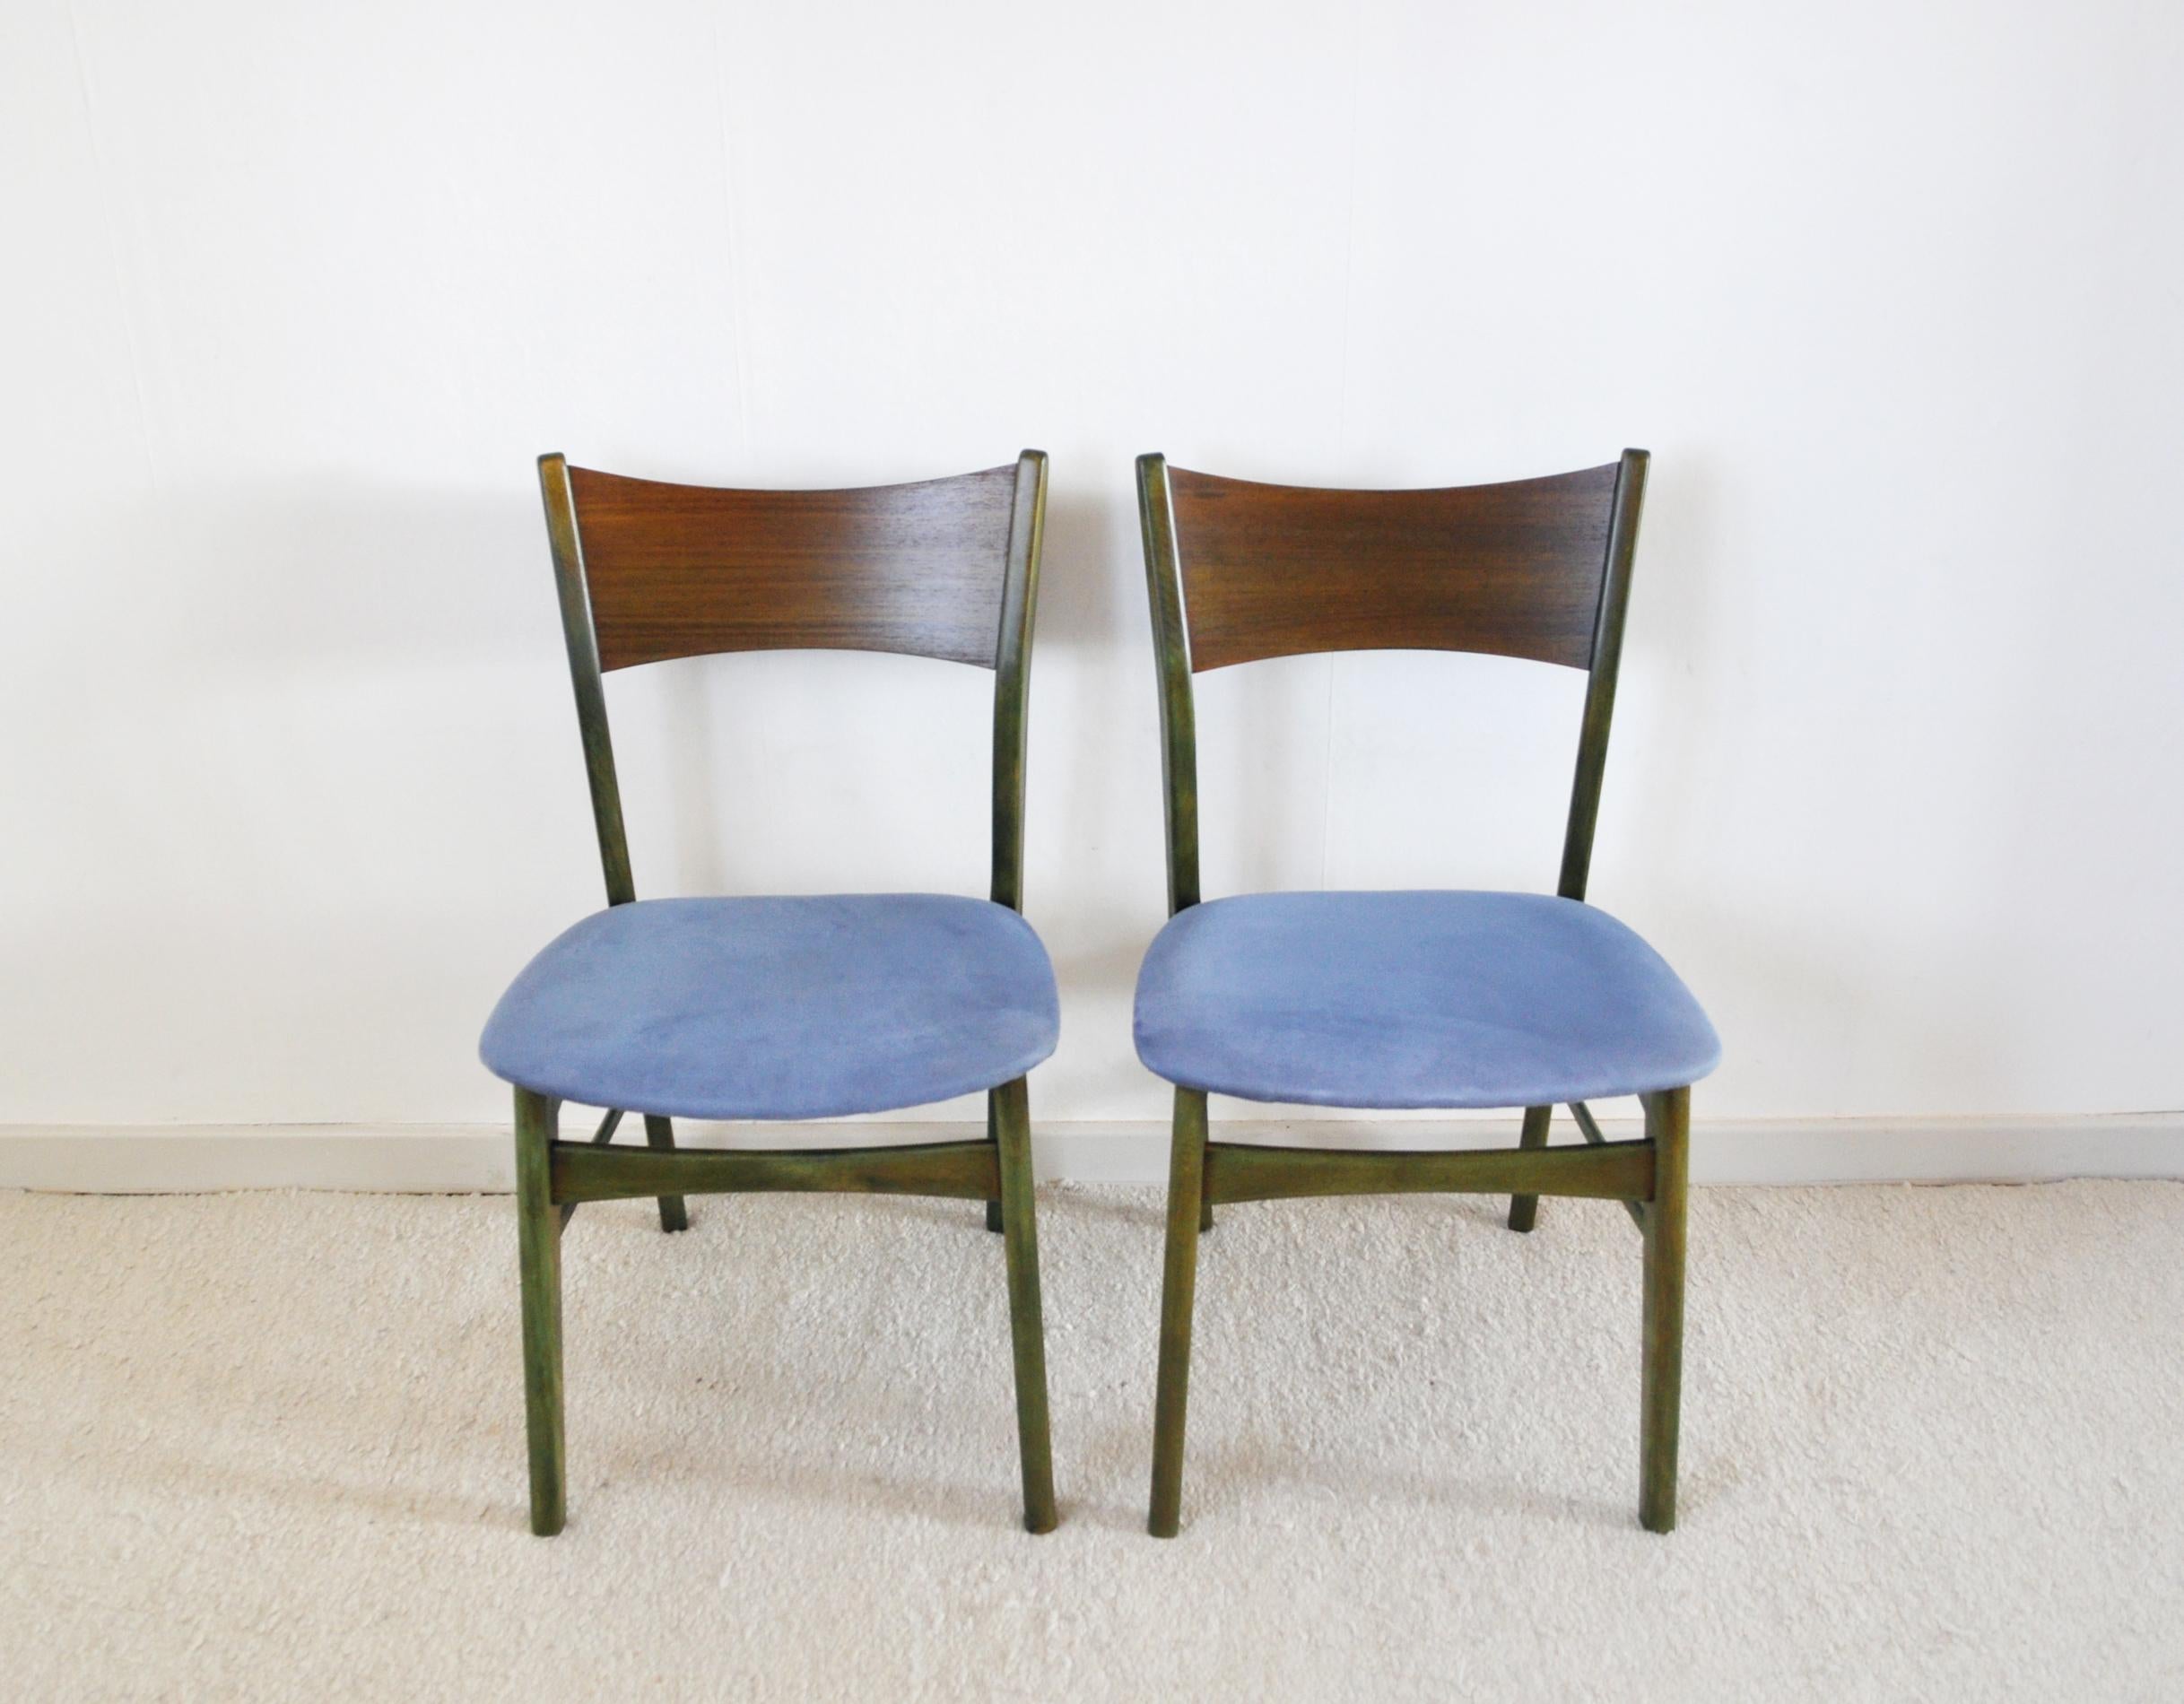 Scandinavian Modern Danish Modern Dining Chair Stained in an Emerald Color, 1960s For Sale